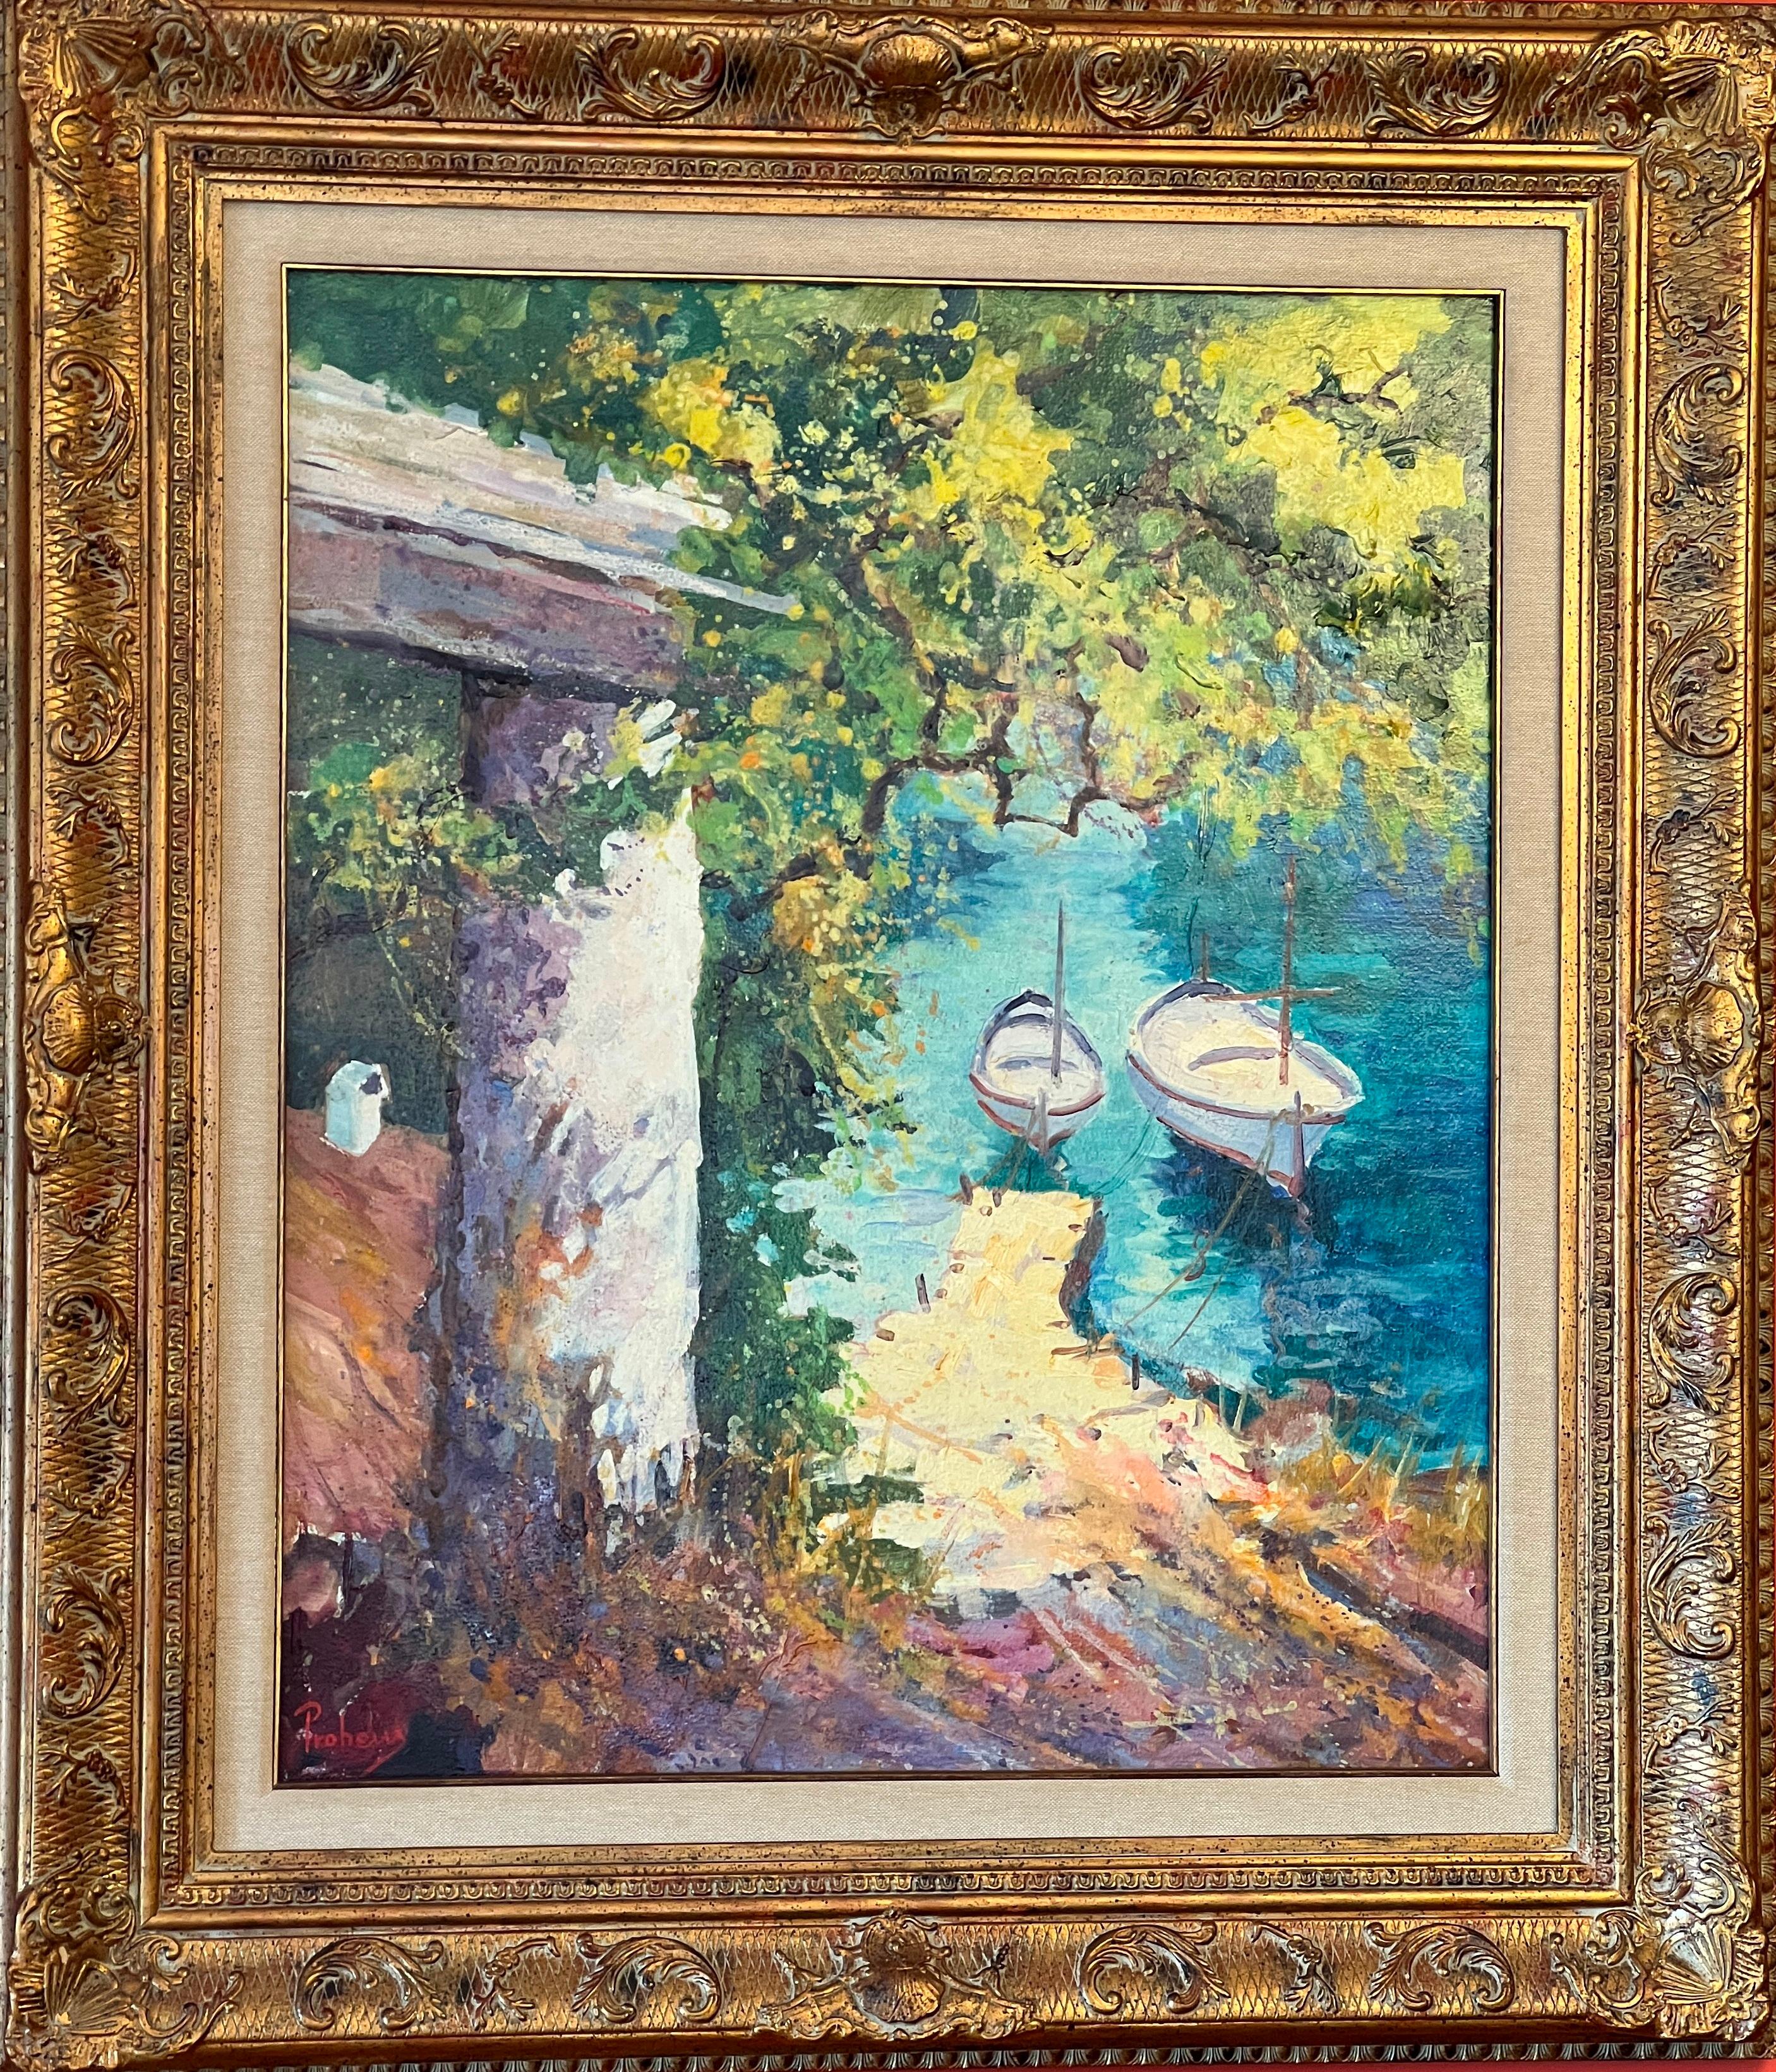 Onofre Prohens Landscape Painting - Prohens Mallorca 2 original acrylic painting